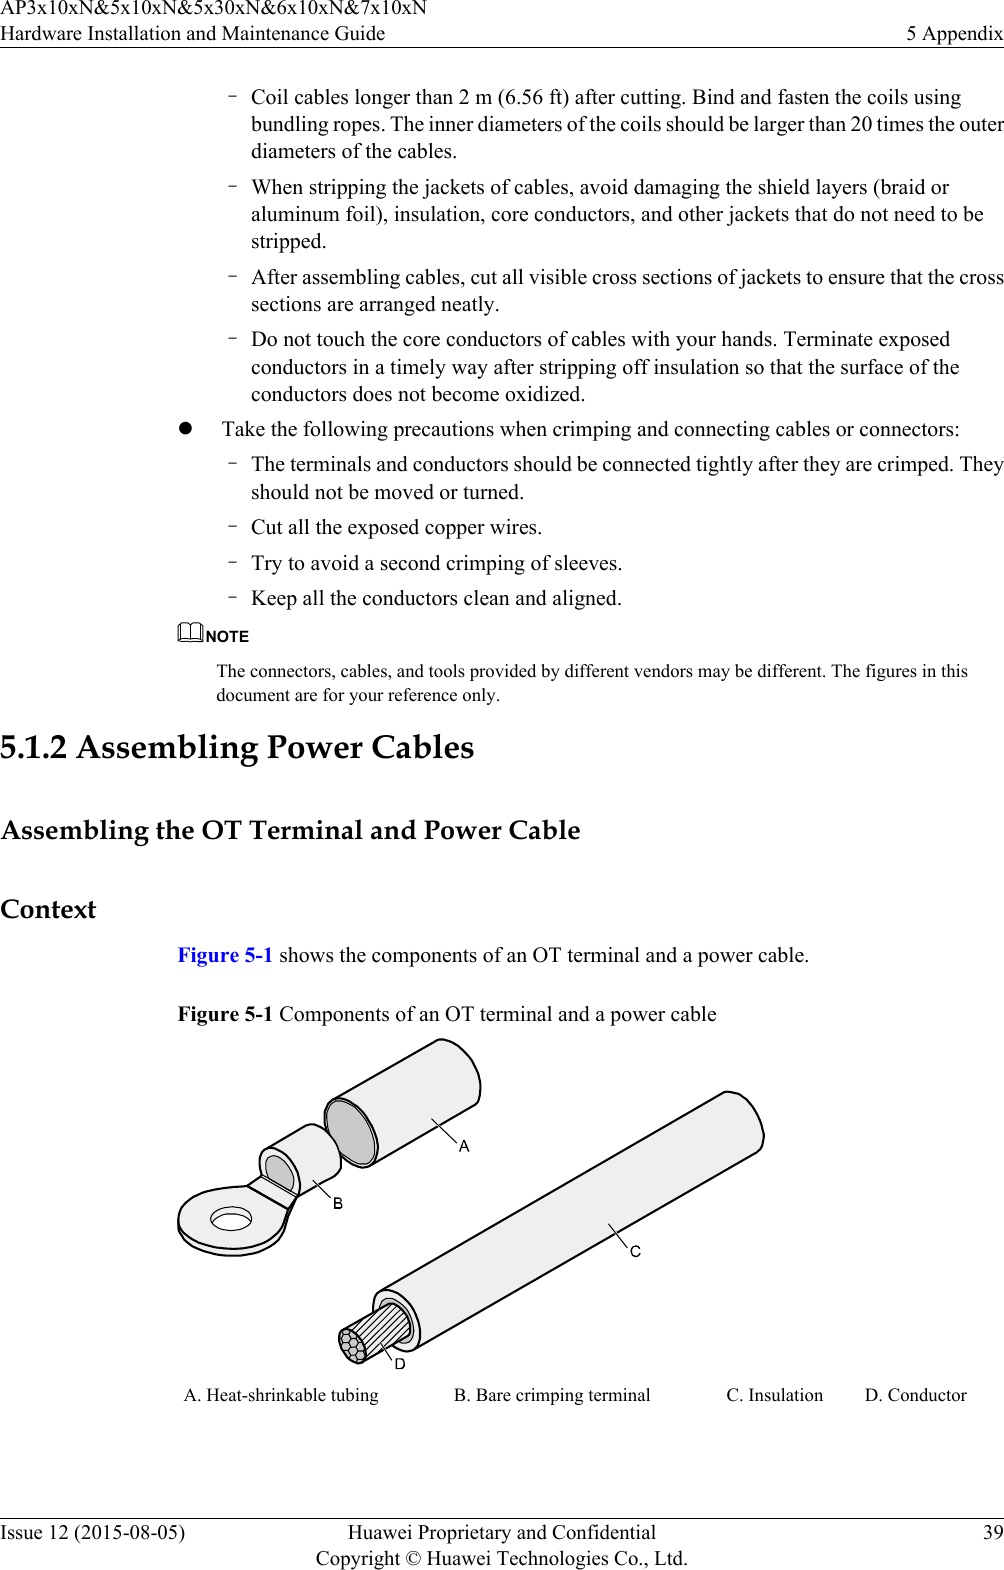 –Coil cables longer than 2 m (6.56 ft) after cutting. Bind and fasten the coils usingbundling ropes. The inner diameters of the coils should be larger than 20 times the outerdiameters of the cables.–When stripping the jackets of cables, avoid damaging the shield layers (braid oraluminum foil), insulation, core conductors, and other jackets that do not need to bestripped.–After assembling cables, cut all visible cross sections of jackets to ensure that the crosssections are arranged neatly.–Do not touch the core conductors of cables with your hands. Terminate exposedconductors in a timely way after stripping off insulation so that the surface of theconductors does not become oxidized.lTake the following precautions when crimping and connecting cables or connectors:–The terminals and conductors should be connected tightly after they are crimped. Theyshould not be moved or turned.–Cut all the exposed copper wires.–Try to avoid a second crimping of sleeves.–Keep all the conductors clean and aligned.NOTEThe connectors, cables, and tools provided by different vendors may be different. The figures in thisdocument are for your reference only.5.1.2 Assembling Power CablesAssembling the OT Terminal and Power CableContextFigure 5-1 shows the components of an OT terminal and a power cable.Figure 5-1 Components of an OT terminal and a power cableA. Heat-shrinkable tubing B. Bare crimping terminal C. Insulation D. Conductor AP3x10xN&amp;5x10xN&amp;5x30xN&amp;6x10xN&amp;7x10xNHardware Installation and Maintenance Guide 5 AppendixIssue 12 (2015-08-05) Huawei Proprietary and ConfidentialCopyright © Huawei Technologies Co., Ltd.39